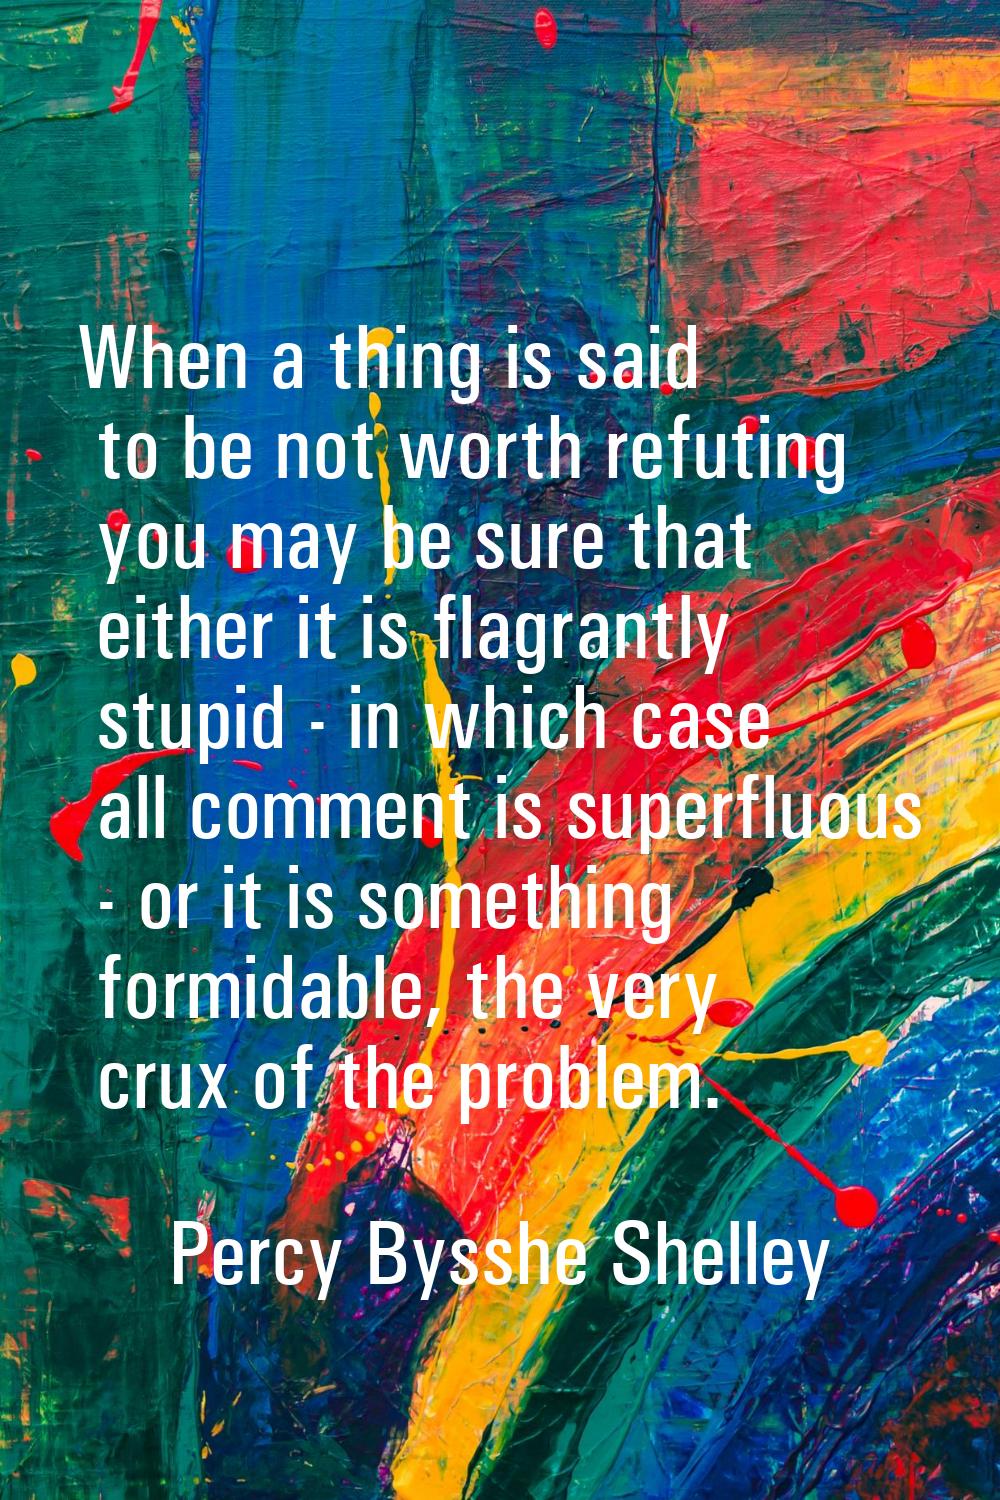 When a thing is said to be not worth refuting you may be sure that either it is flagrantly stupid -